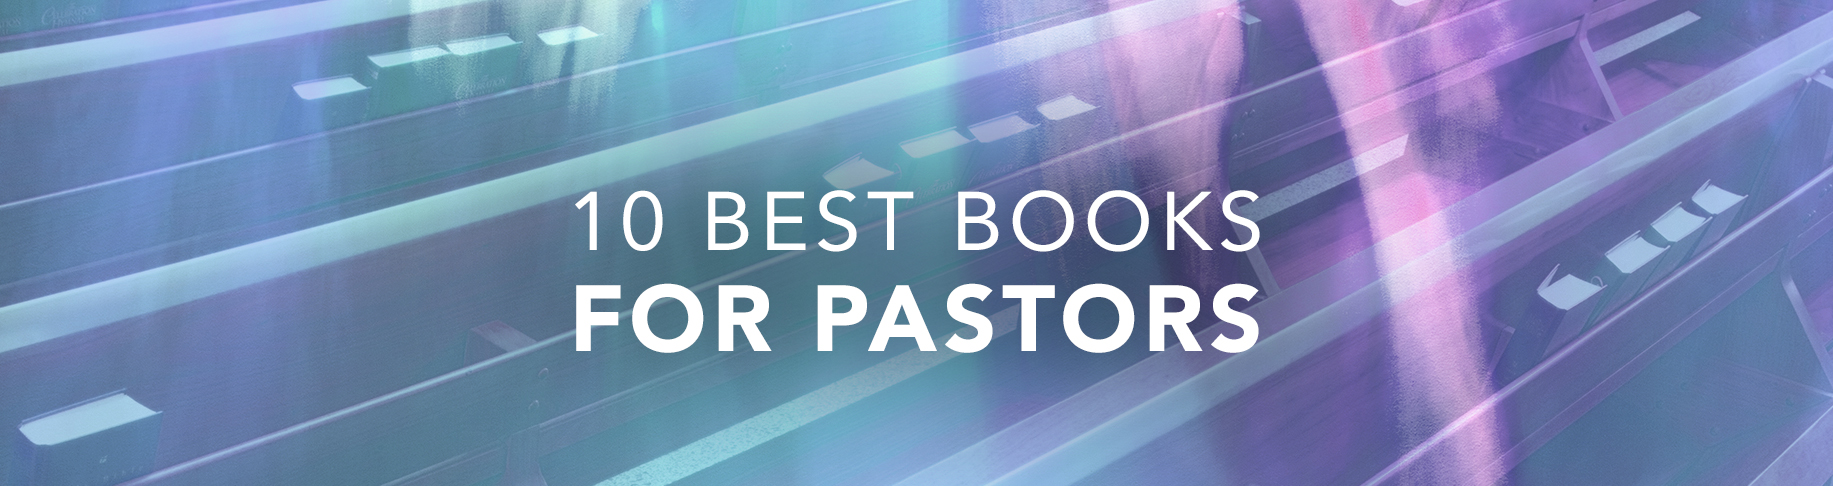 10 Best Books for Pastors from IVP